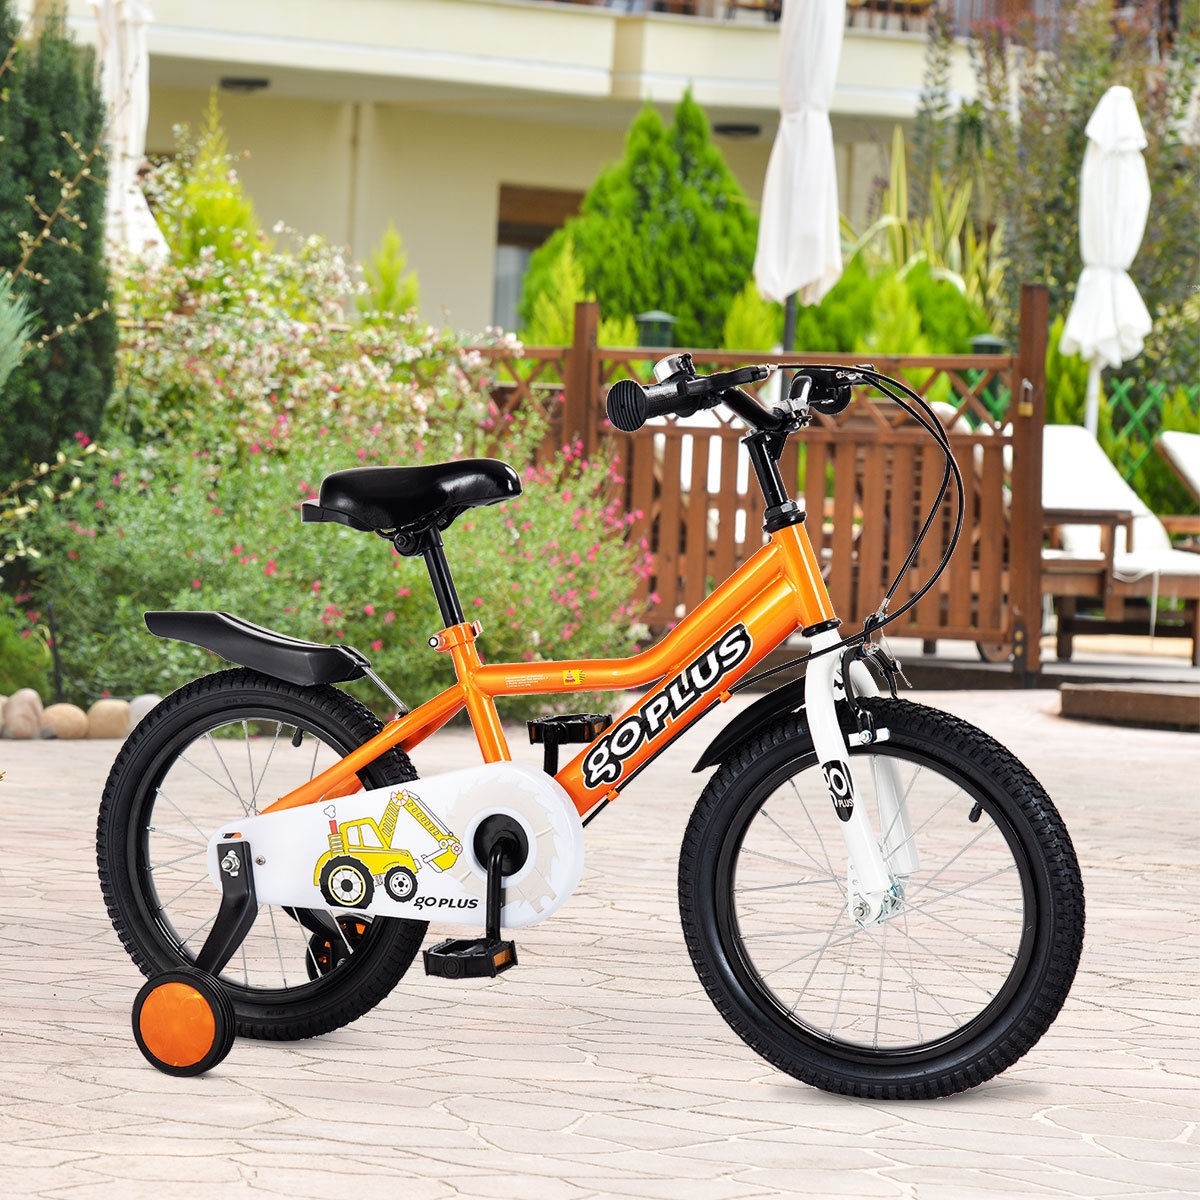 Kids Bike For Outdoor Sports With 12 In. Training Wheel